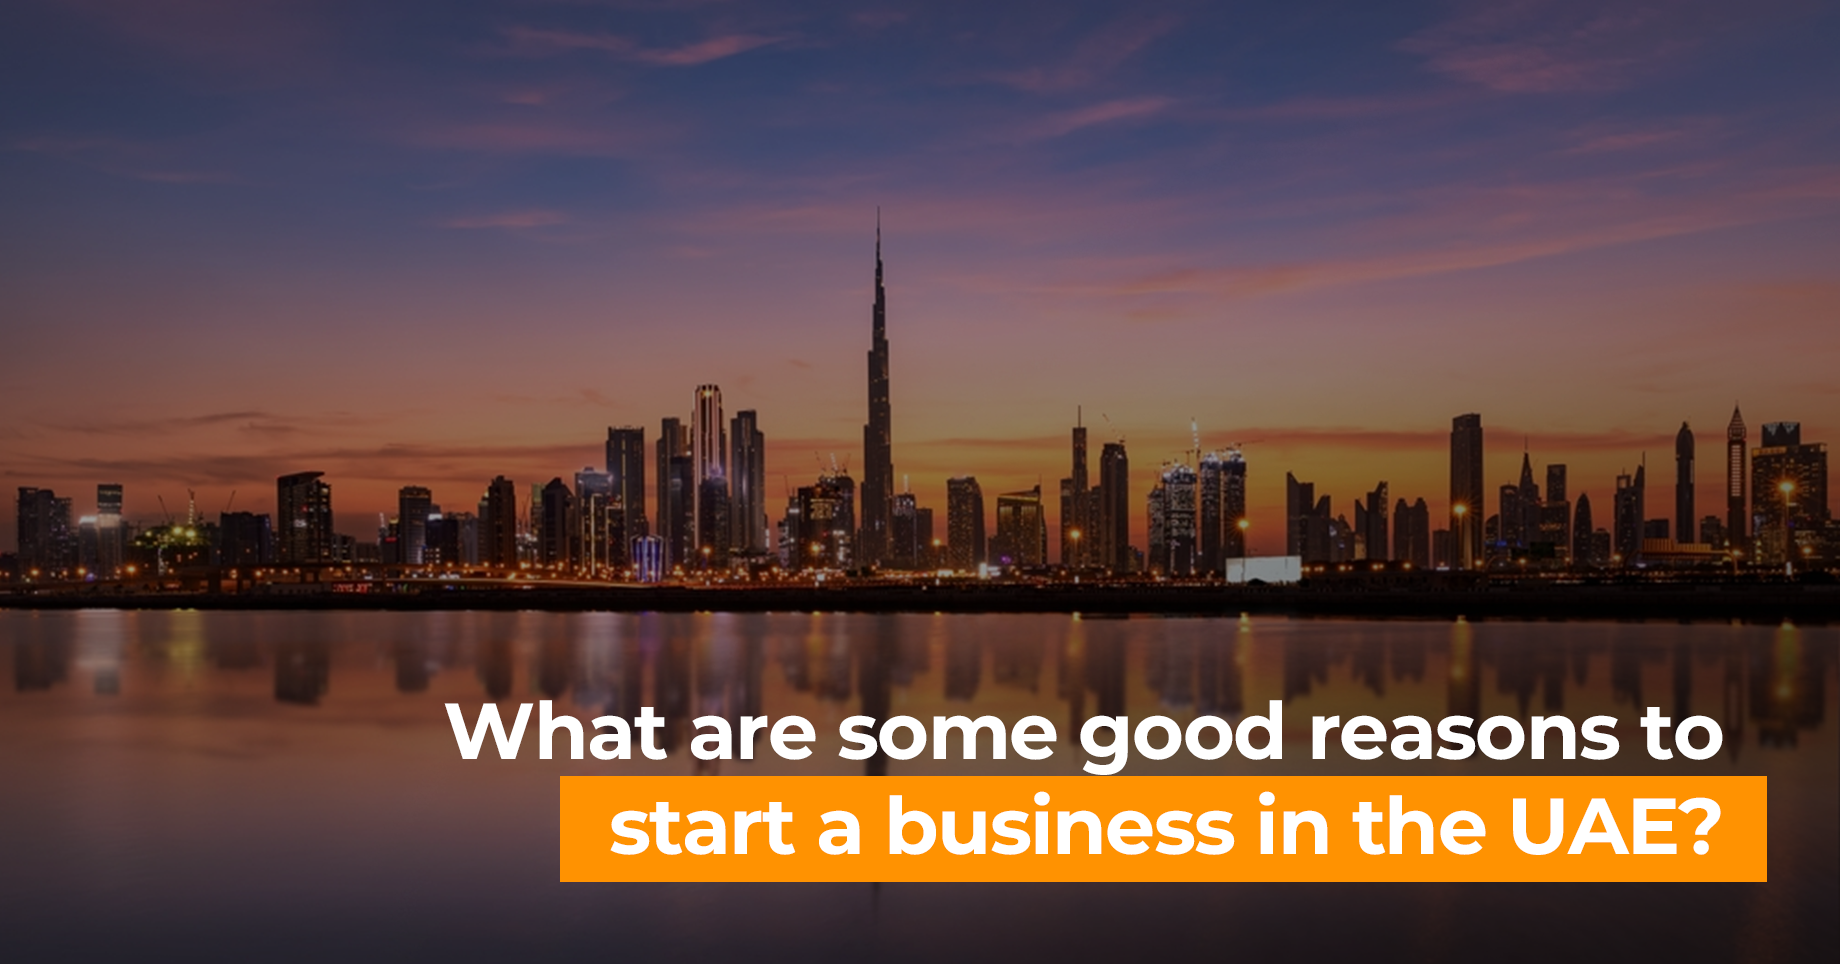 What are some good reasons to start a business in the UAE?